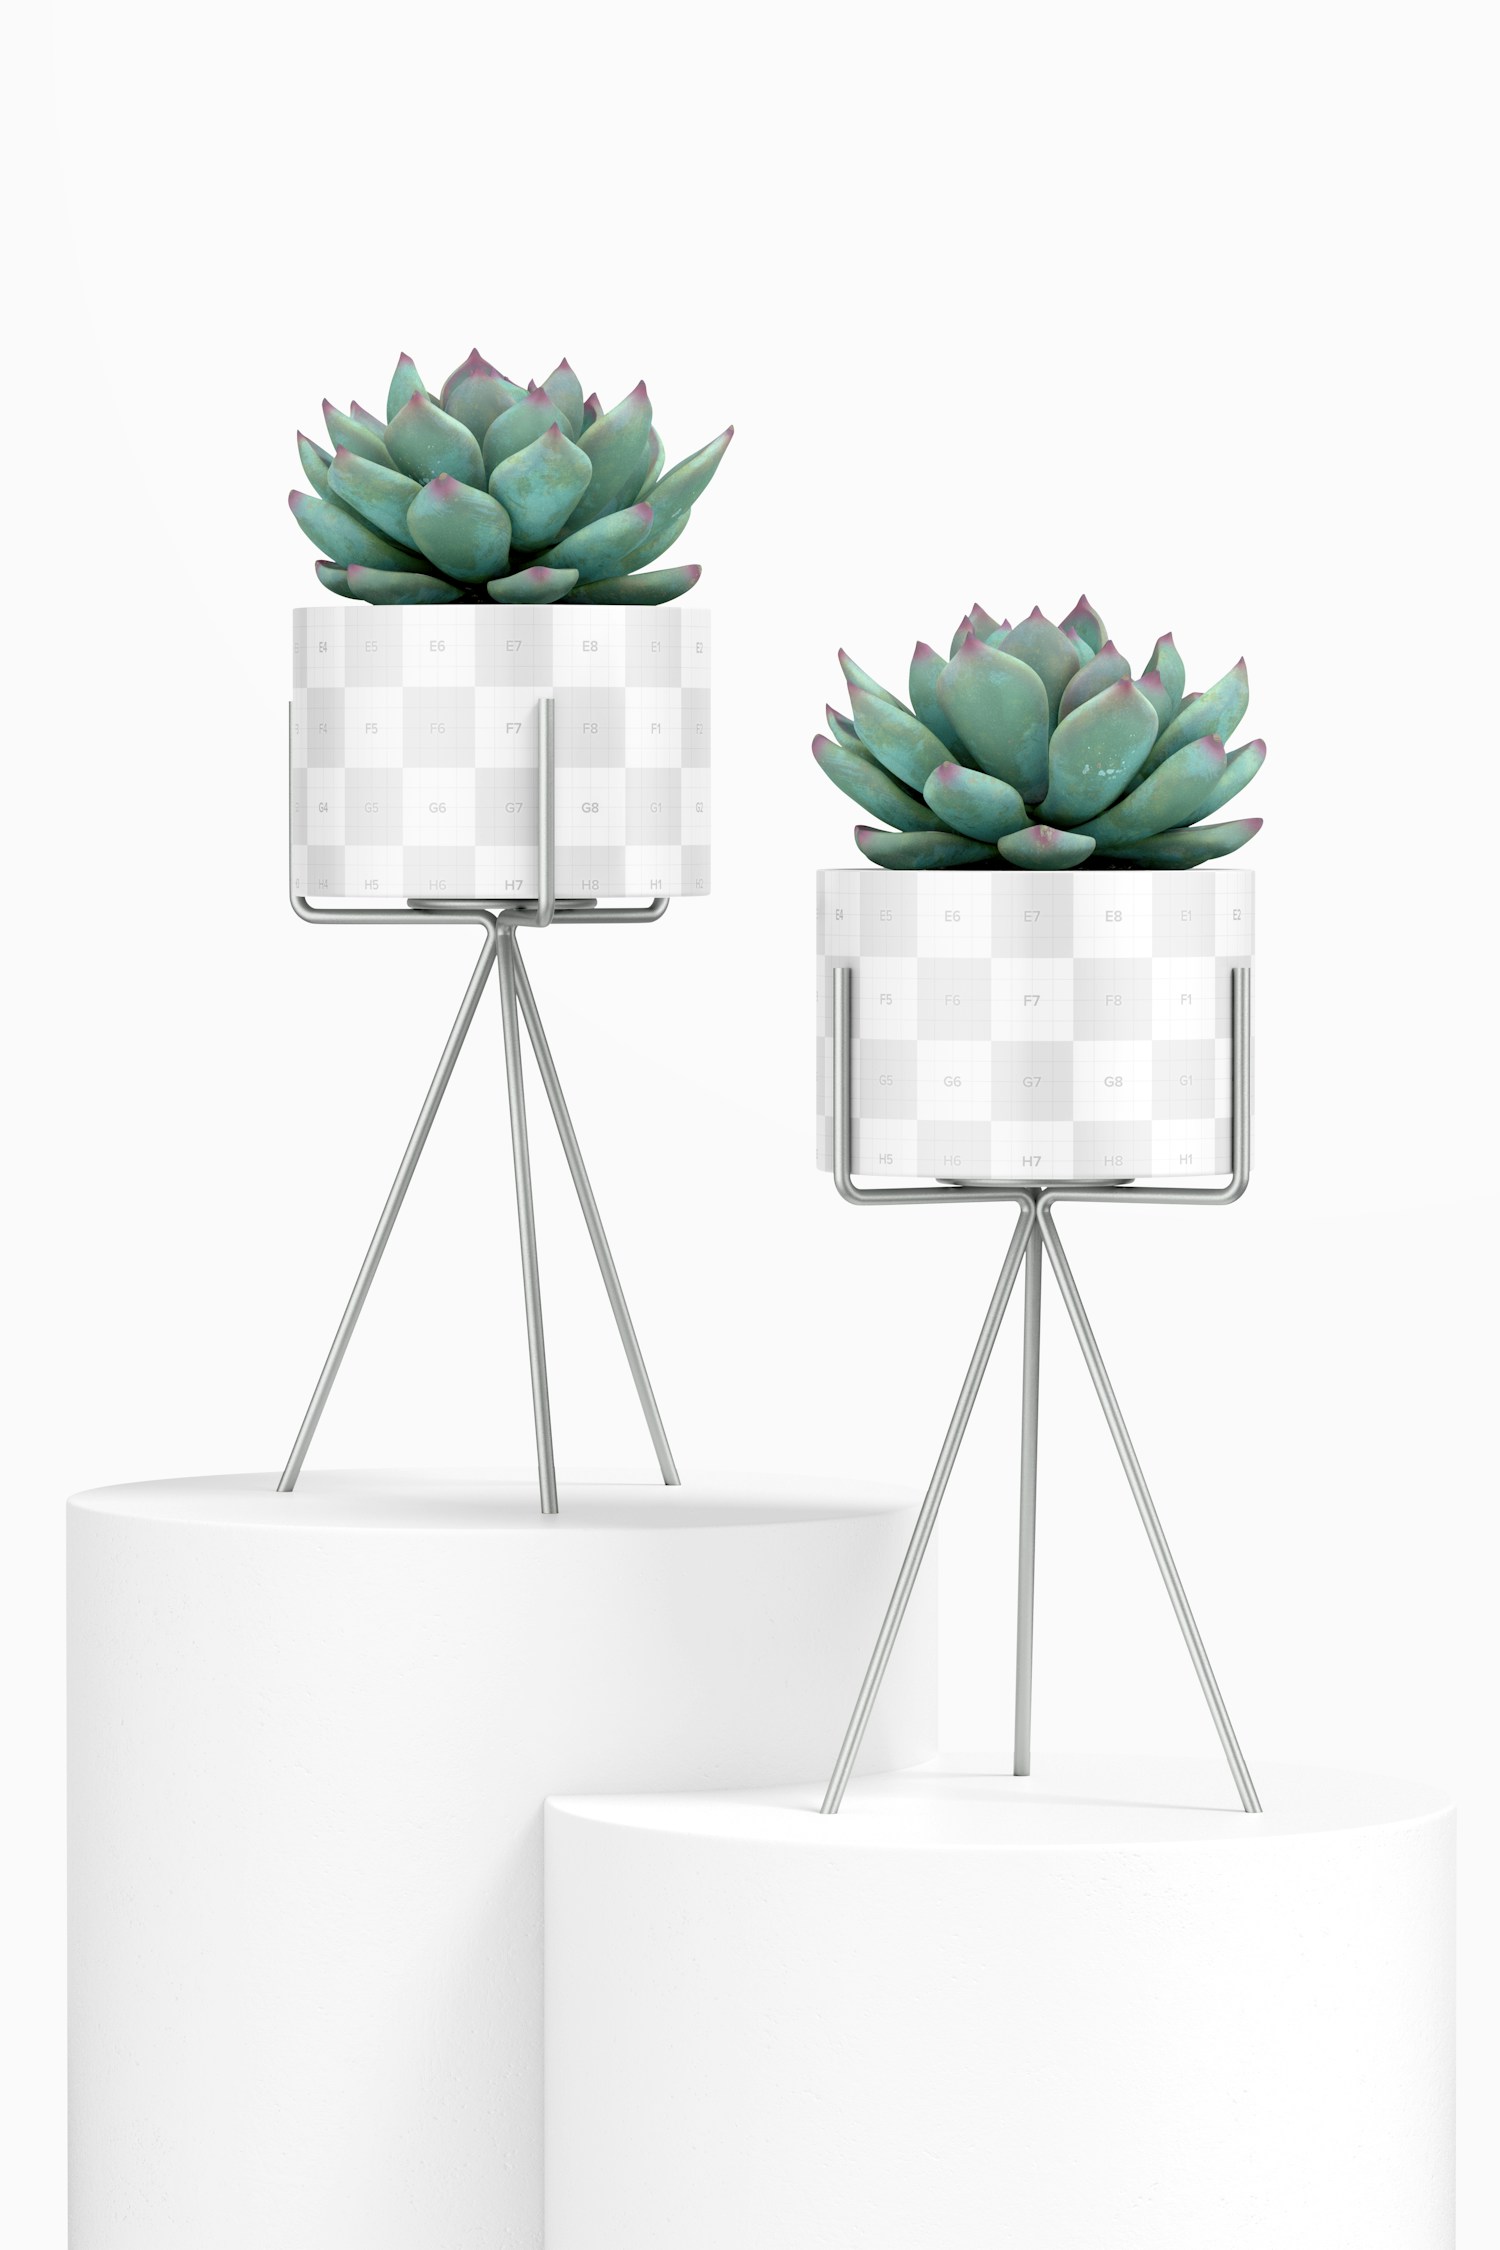 Small Flower Pots with Metal Stands Mockup